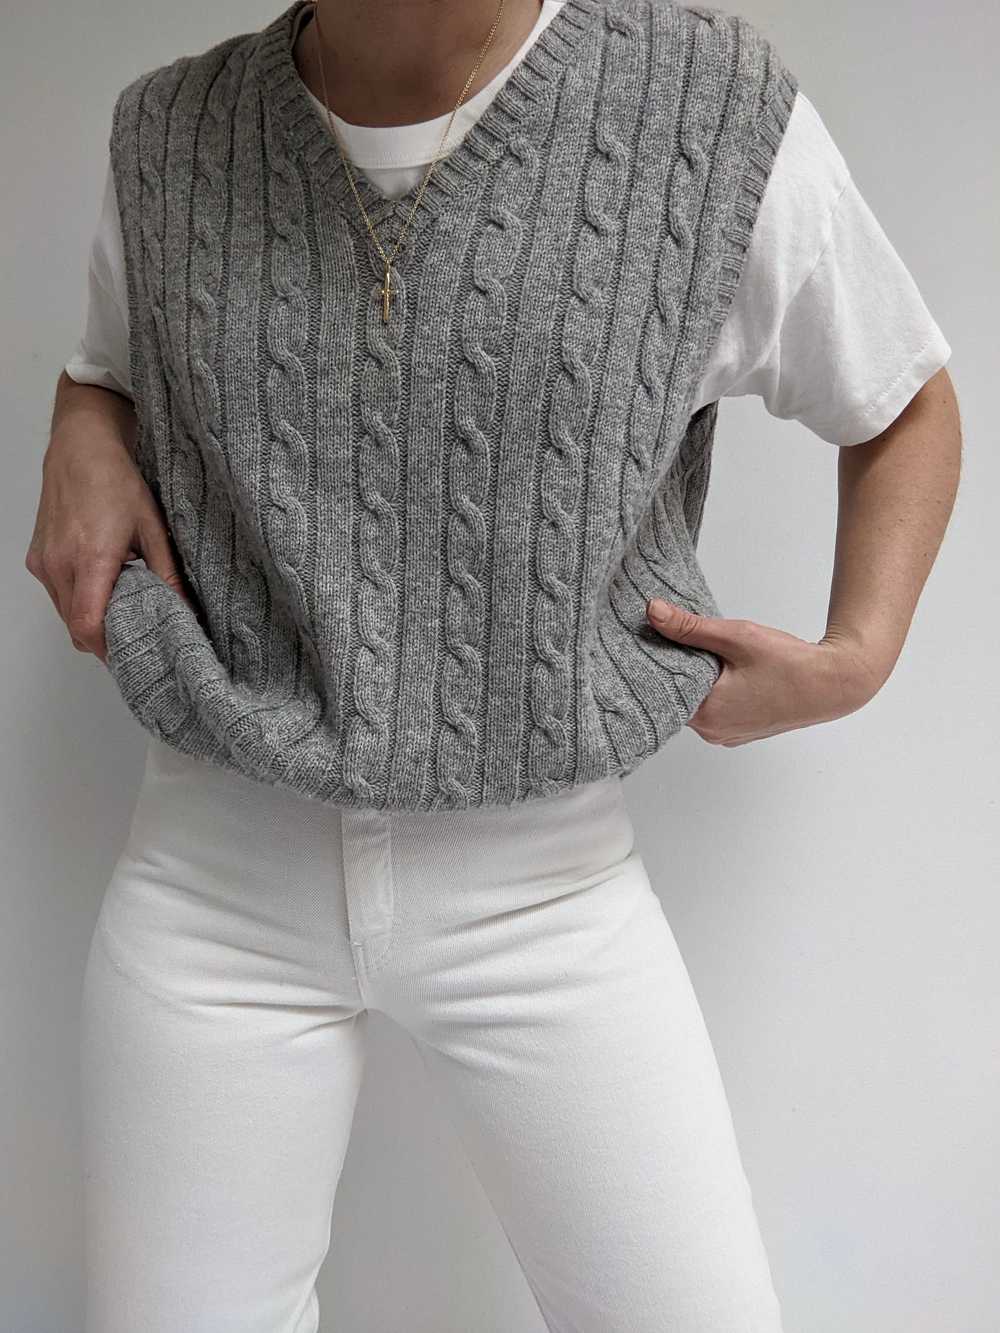 Vintage Grey Cable Knit Lambswool Sweater Vest - image 3